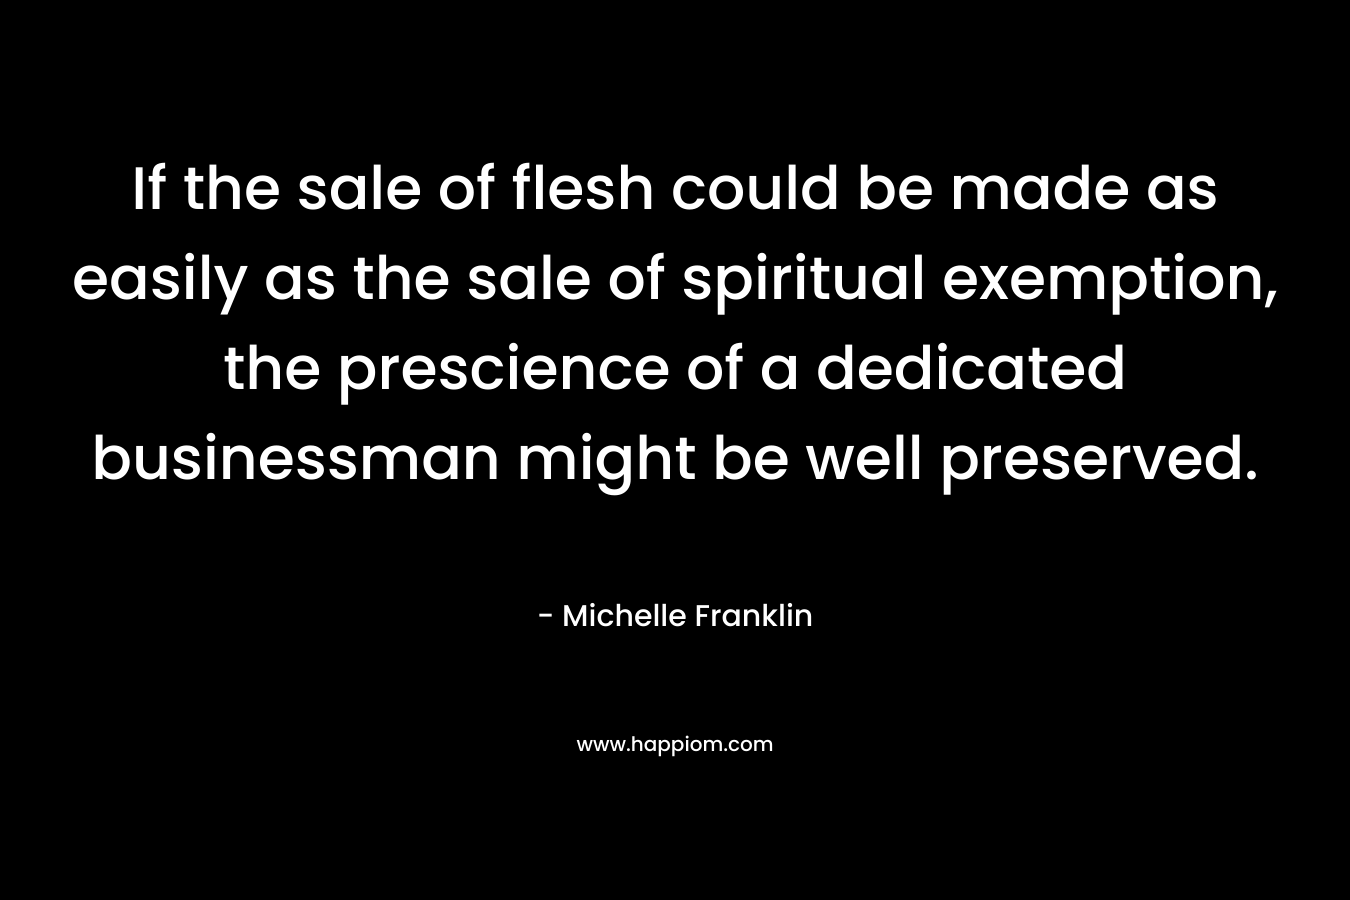 If the sale of flesh could be made as easily as the sale of spiritual exemption, the prescience of a dedicated businessman might be well preserved.